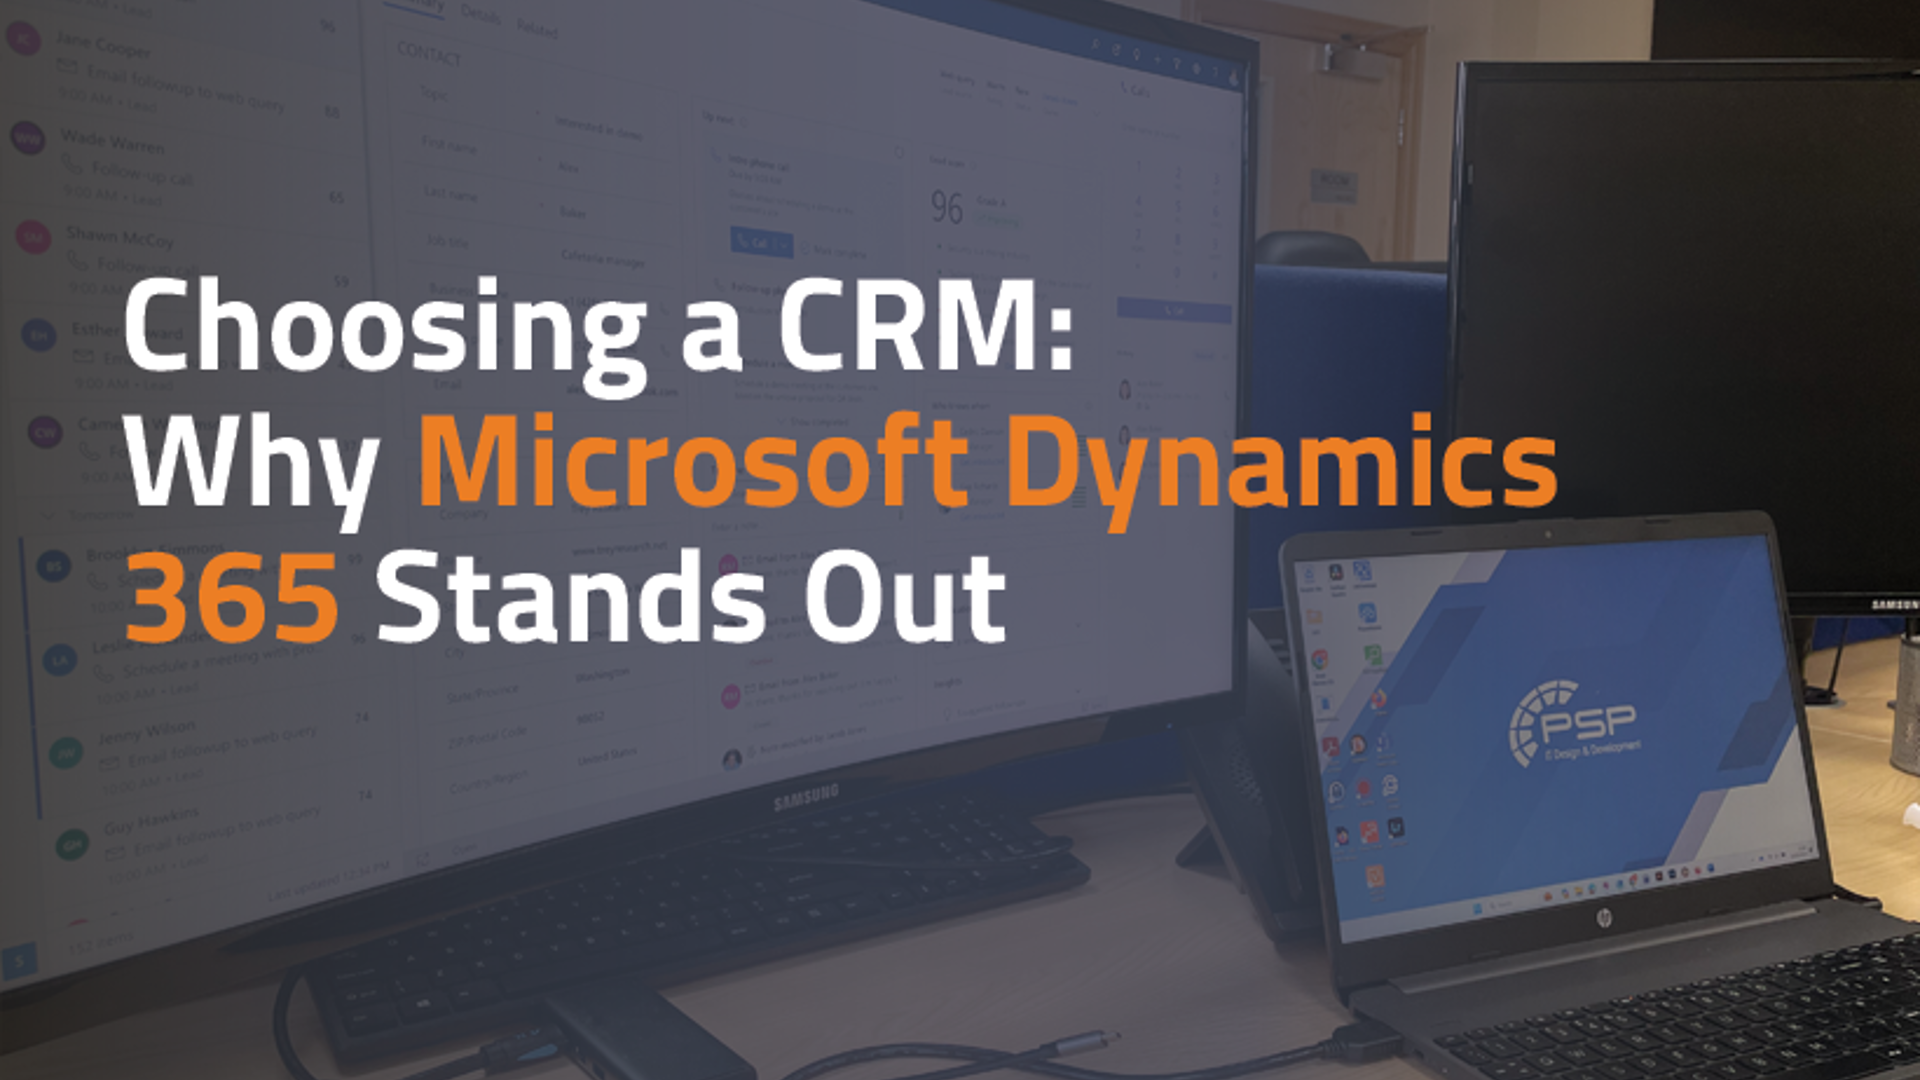 Why is Dynamics 365 CRM becoming more popular?